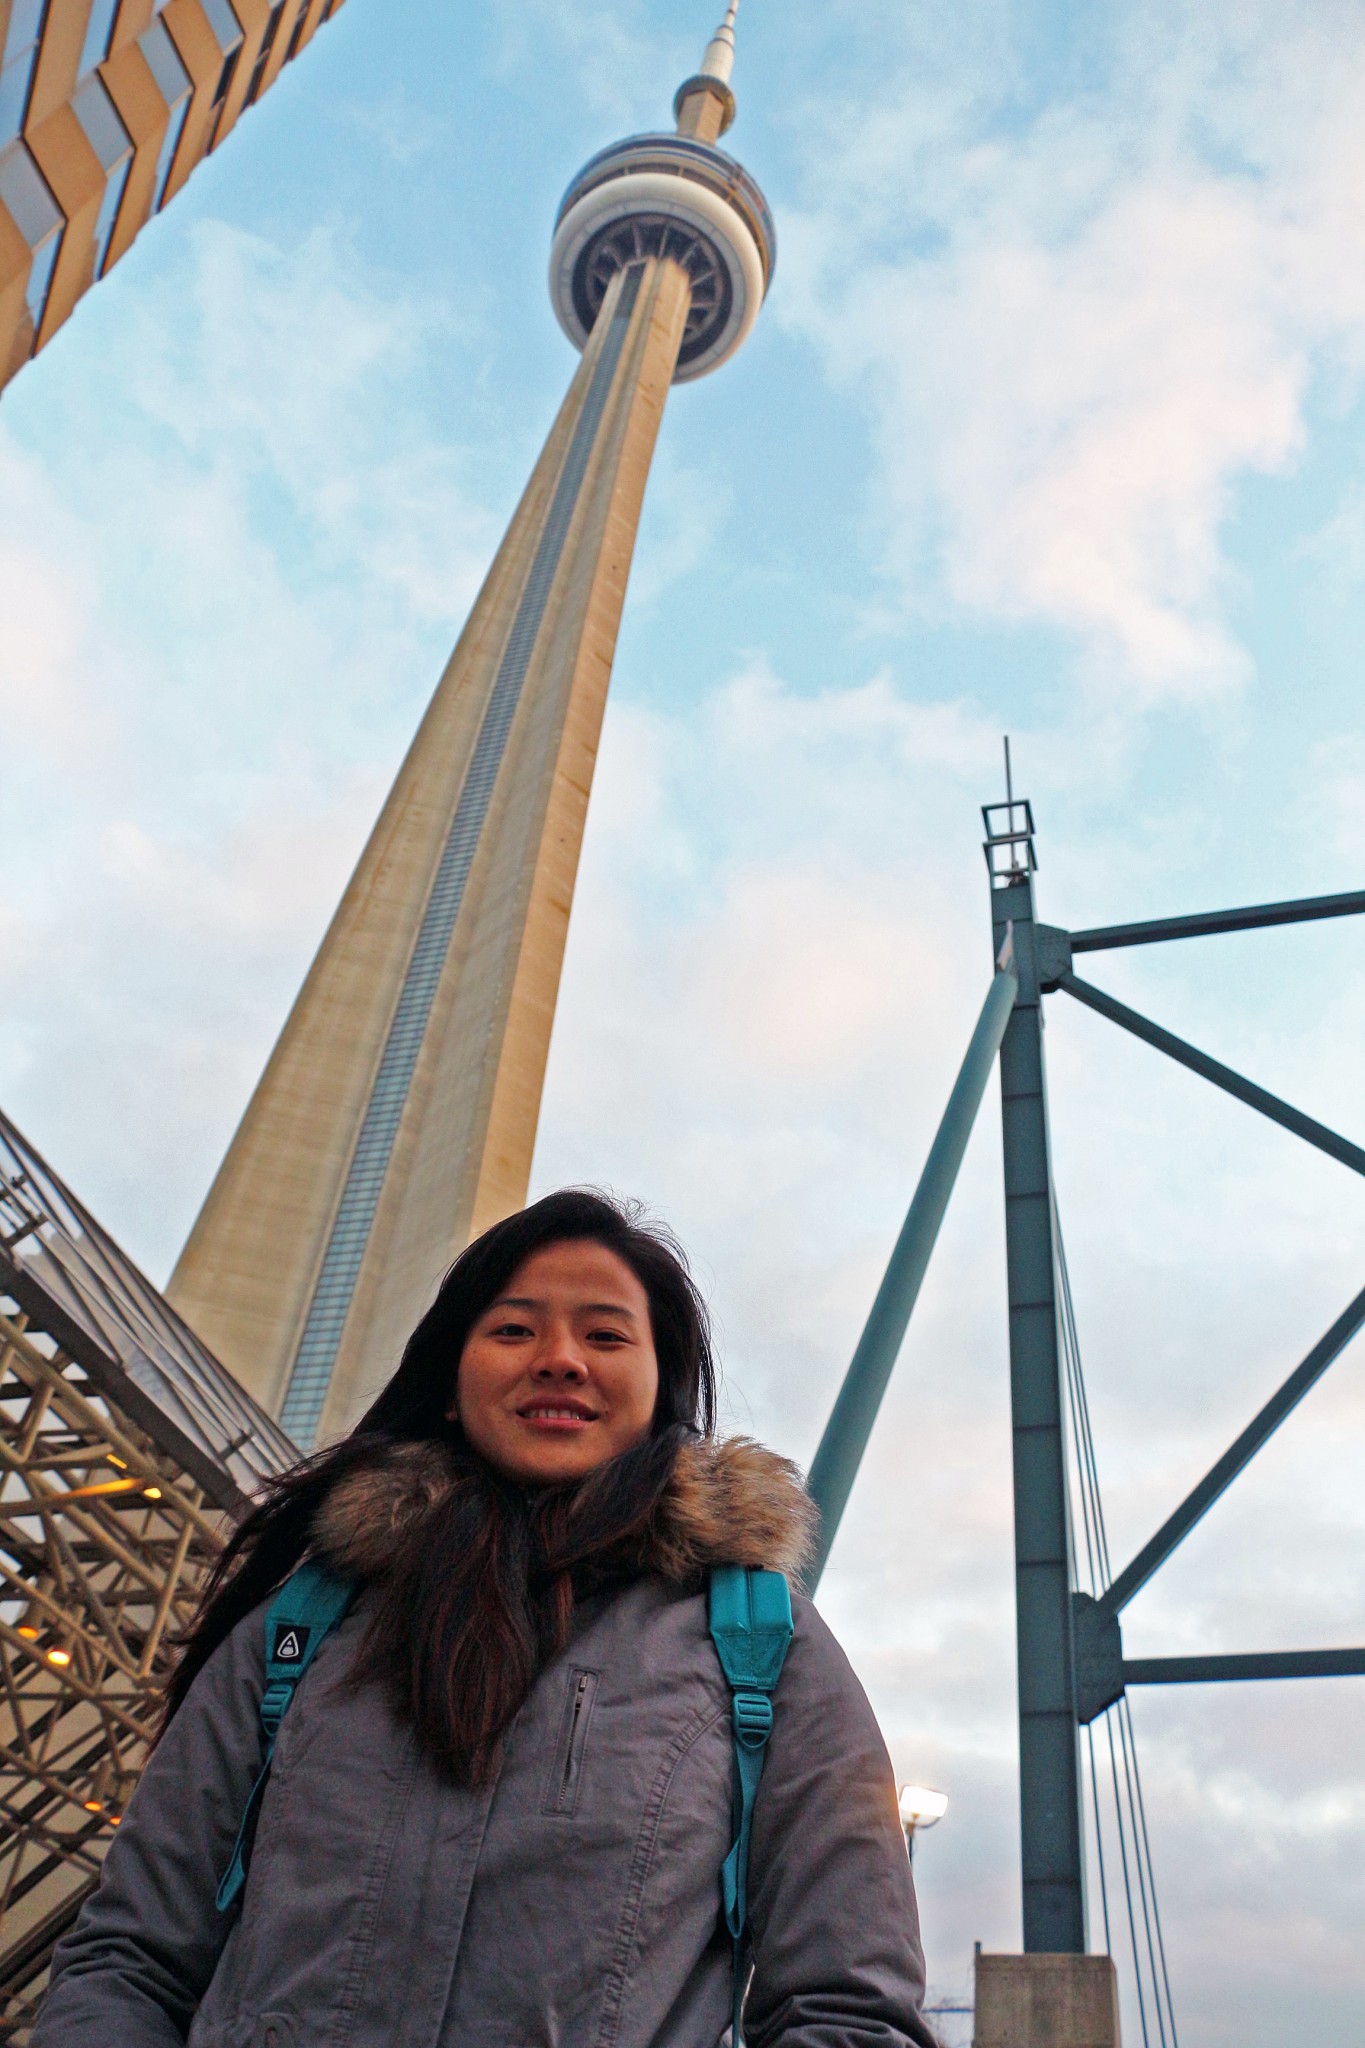 Dorjee Dolma visits the CN Tower for the first time, two weeks after arriving in Toronto.